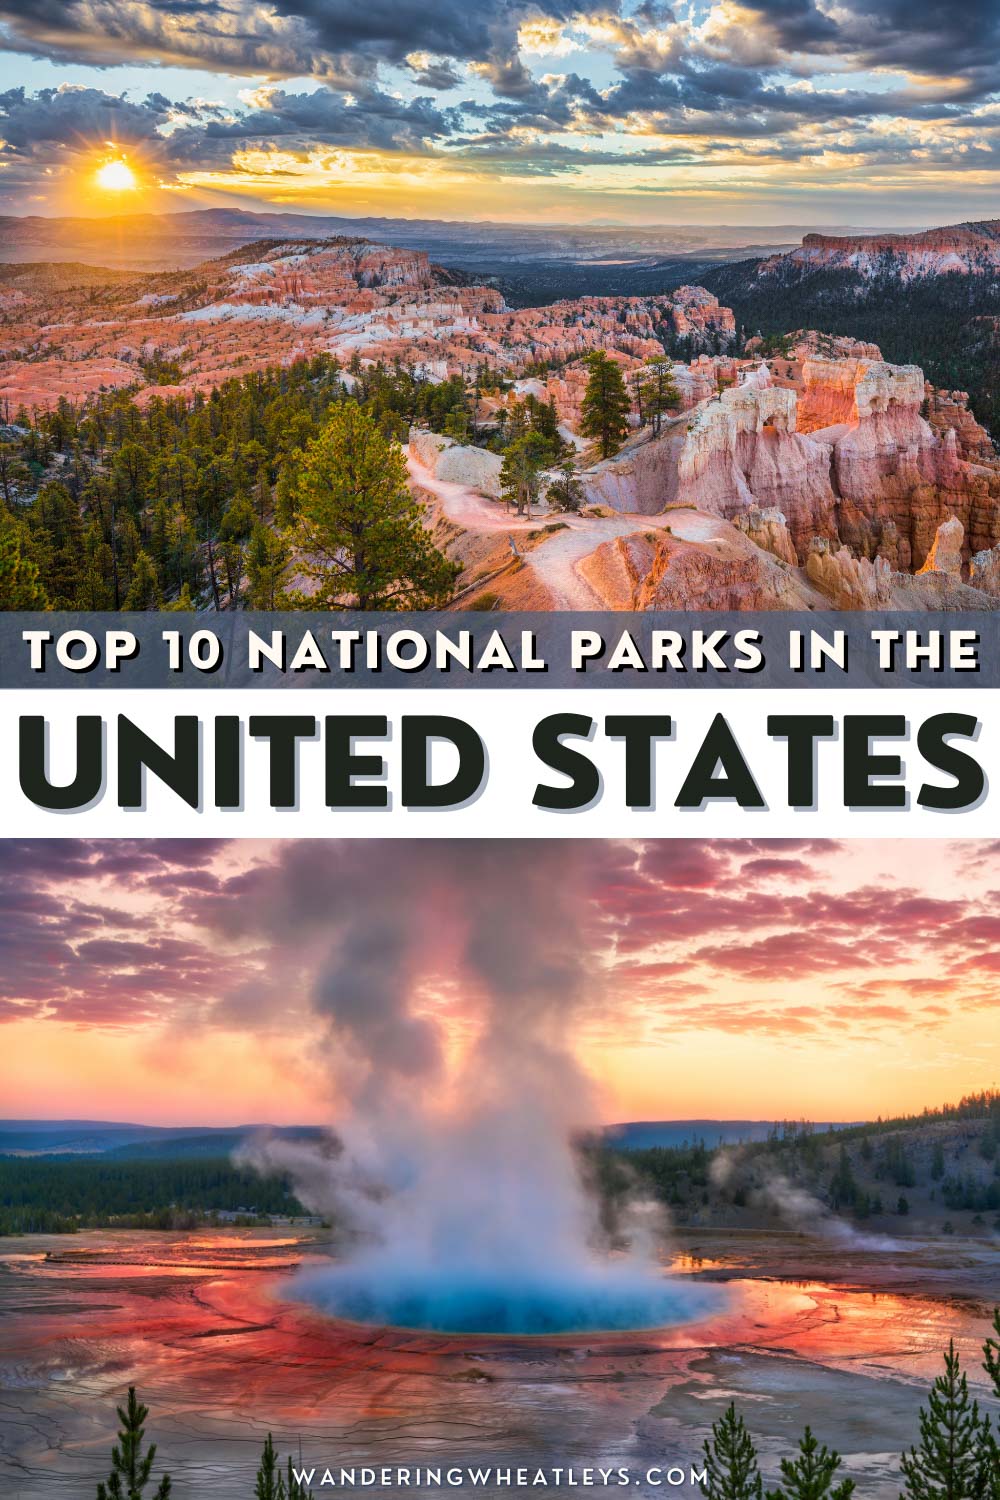 The Top National Parks in the USA